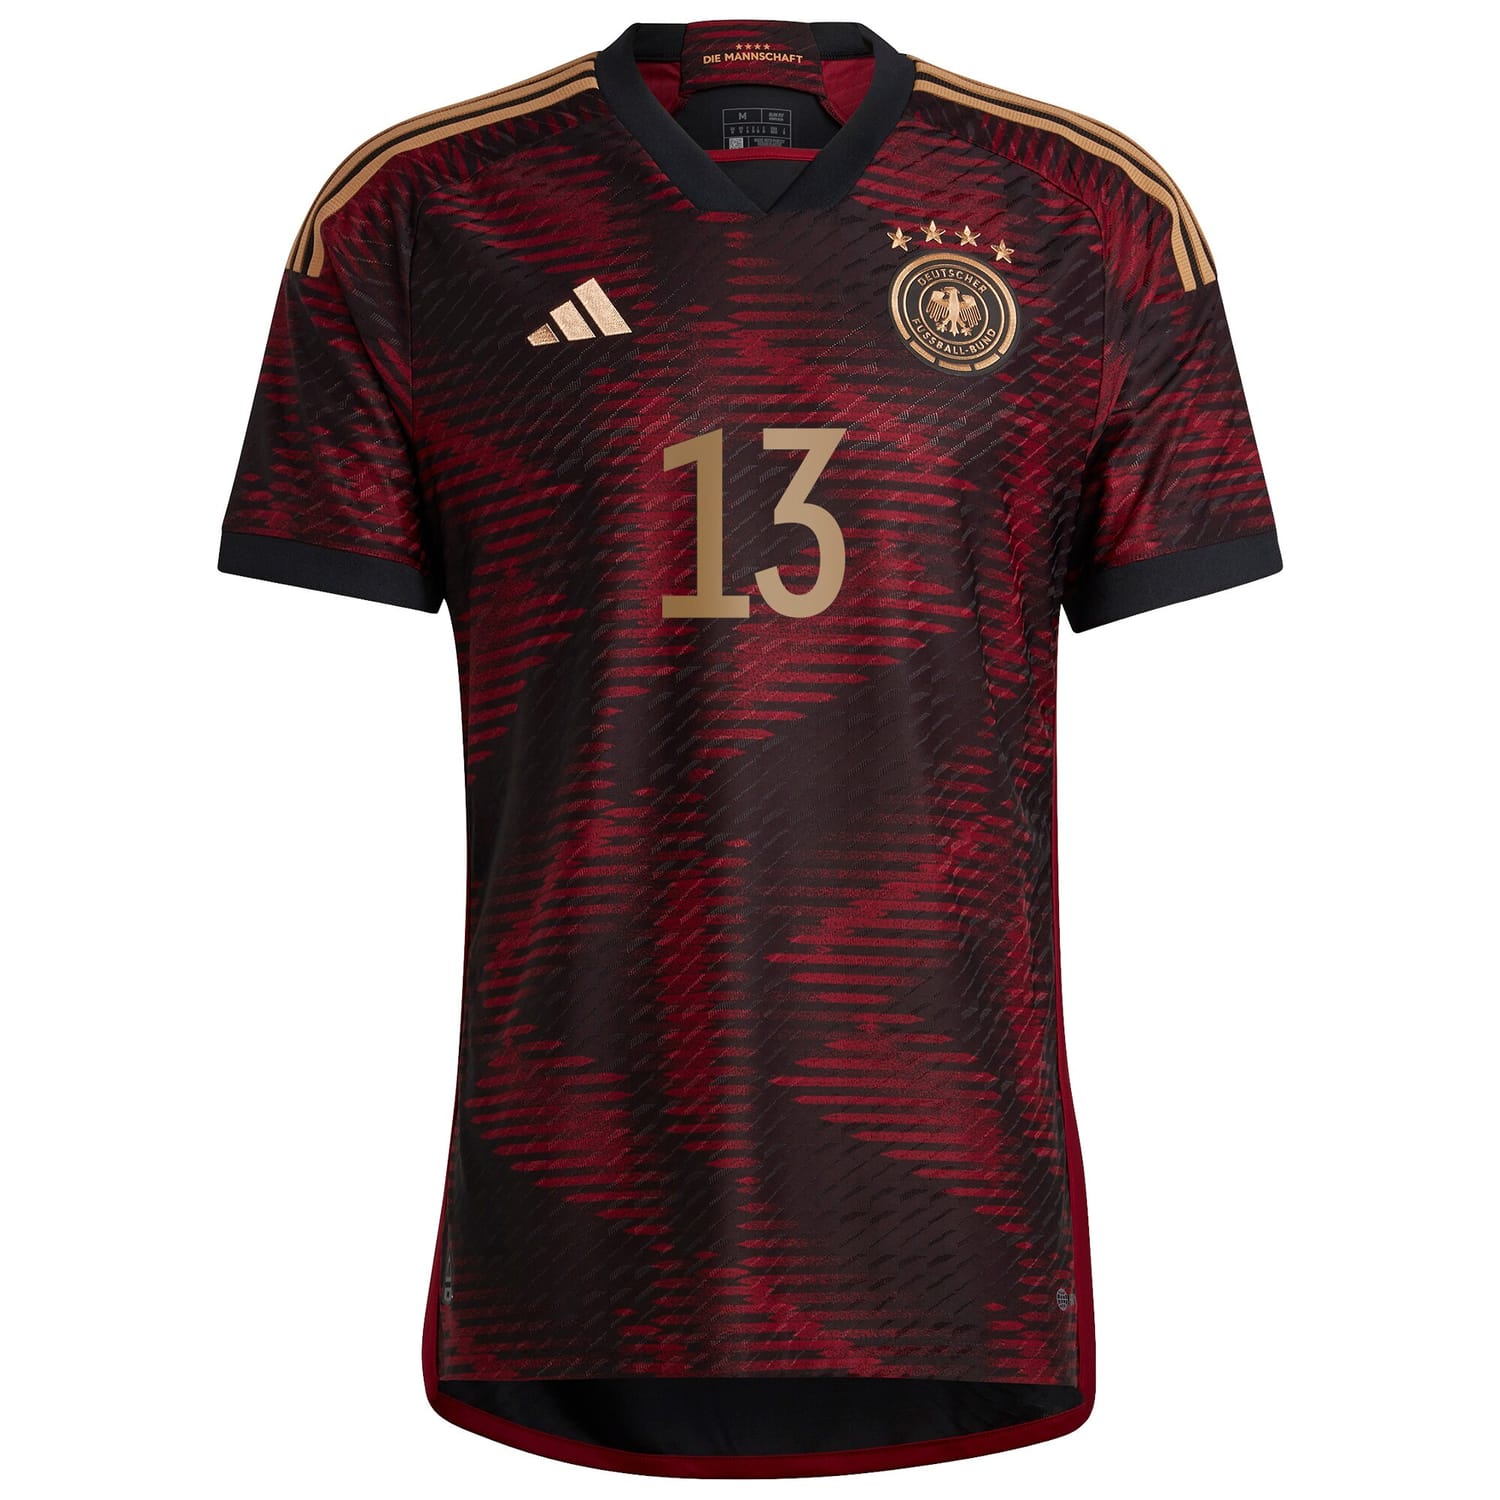 Germany National Team Away Authentic Jersey Shirt Black 2022-23 player Thomas Müller printing for Men